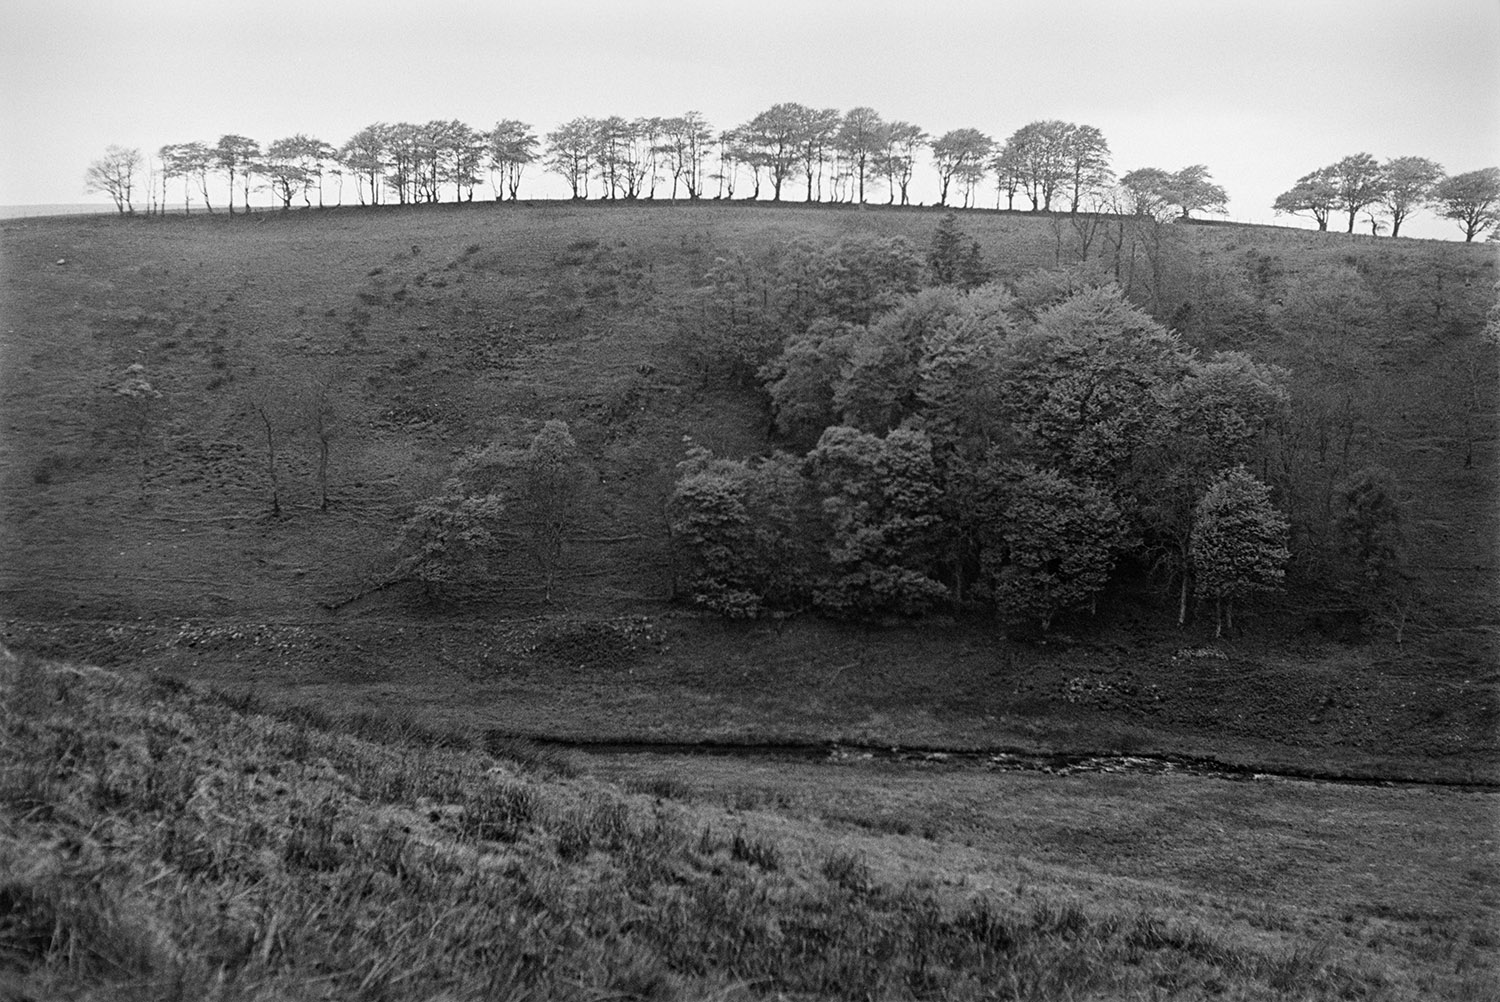 Trees on a hillside at Brendon, Exmoor. A stream is running through the valley.